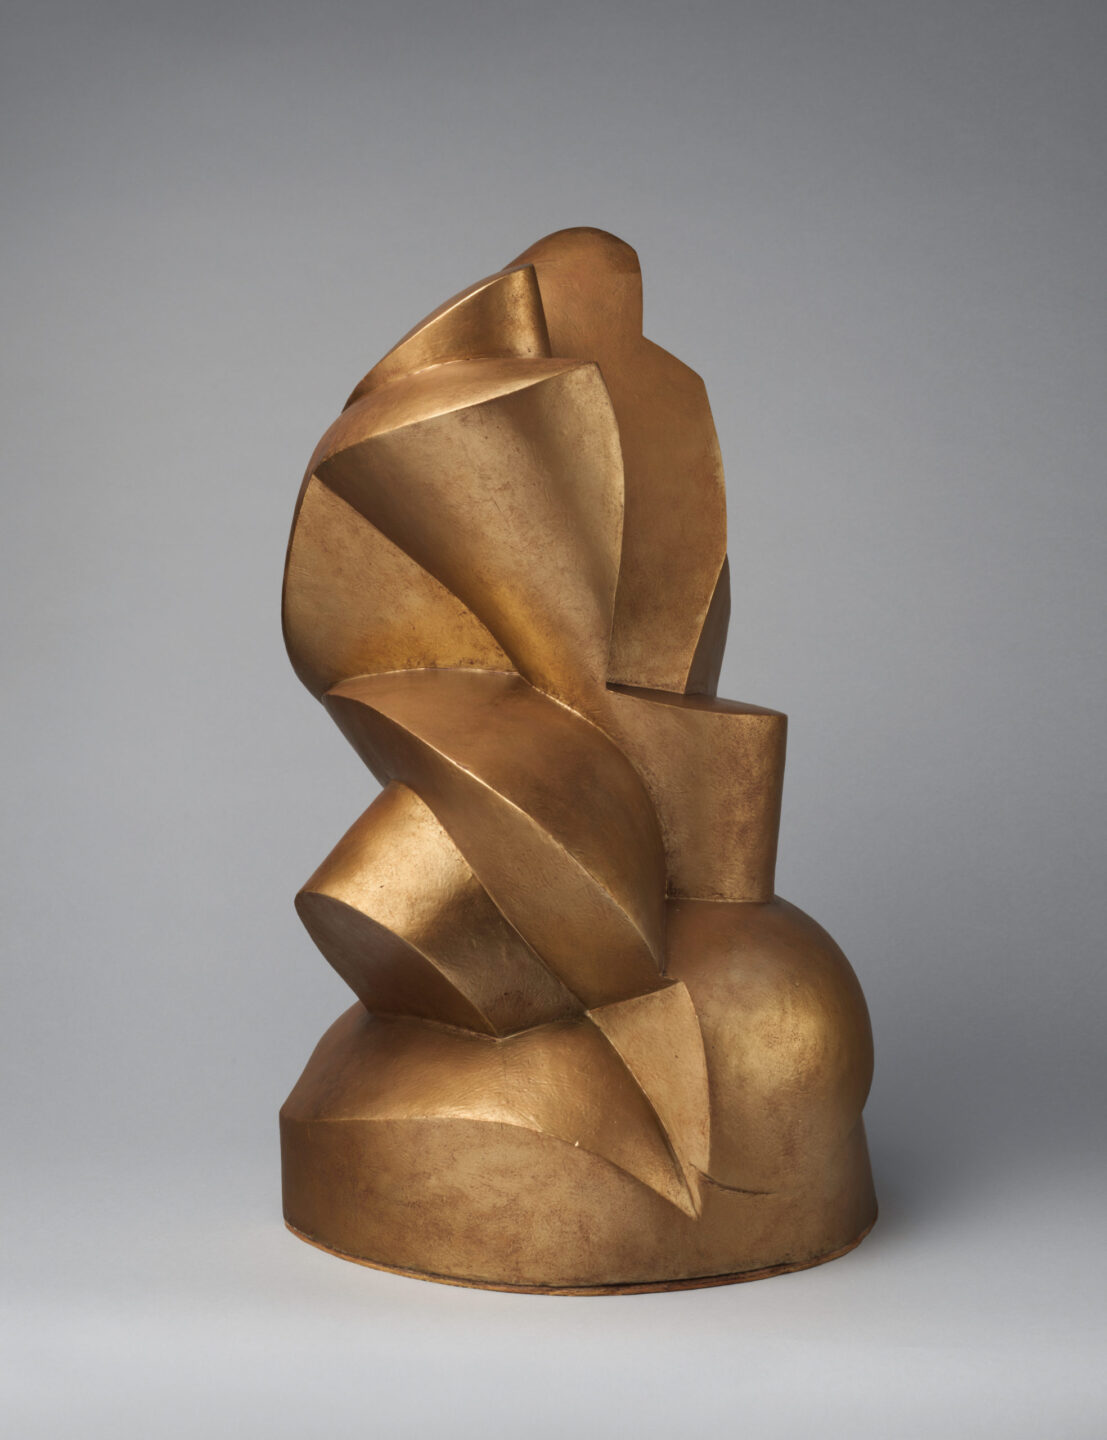 Gold sculpture of broad, cylindrical and flat-edged forms including a spiral.